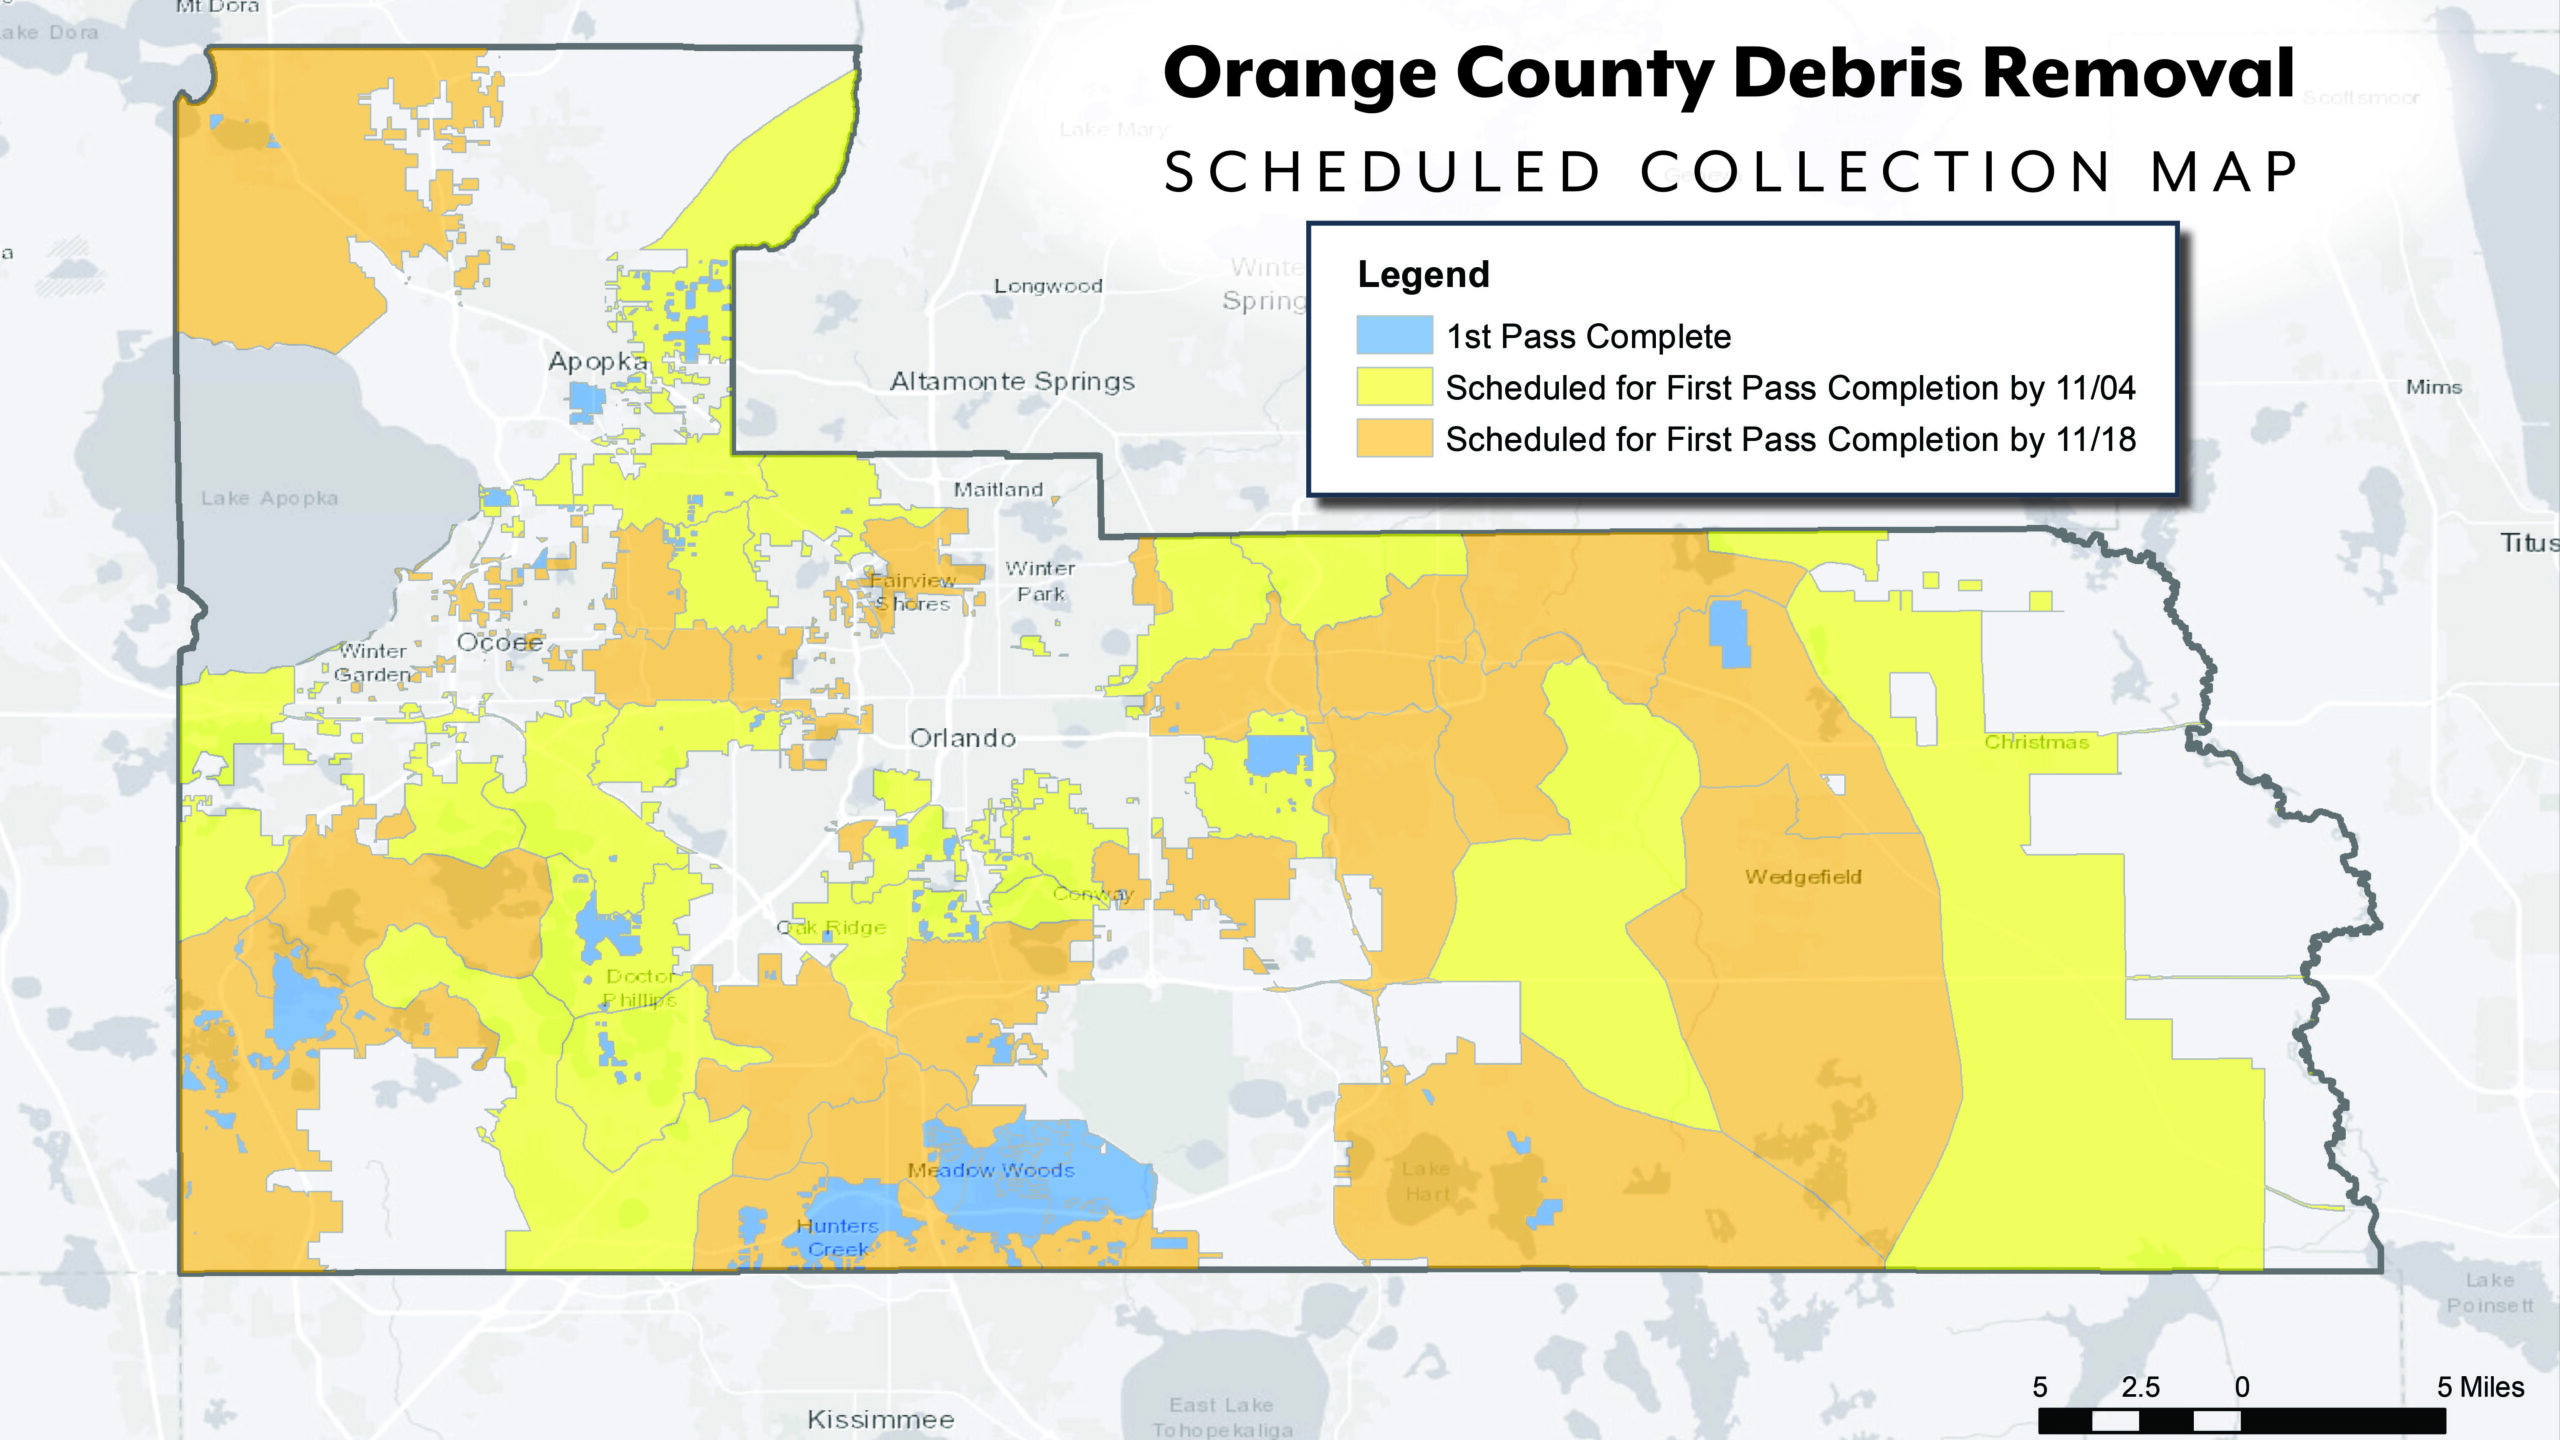 Orange County Debris Removal Scheduled Collection Map